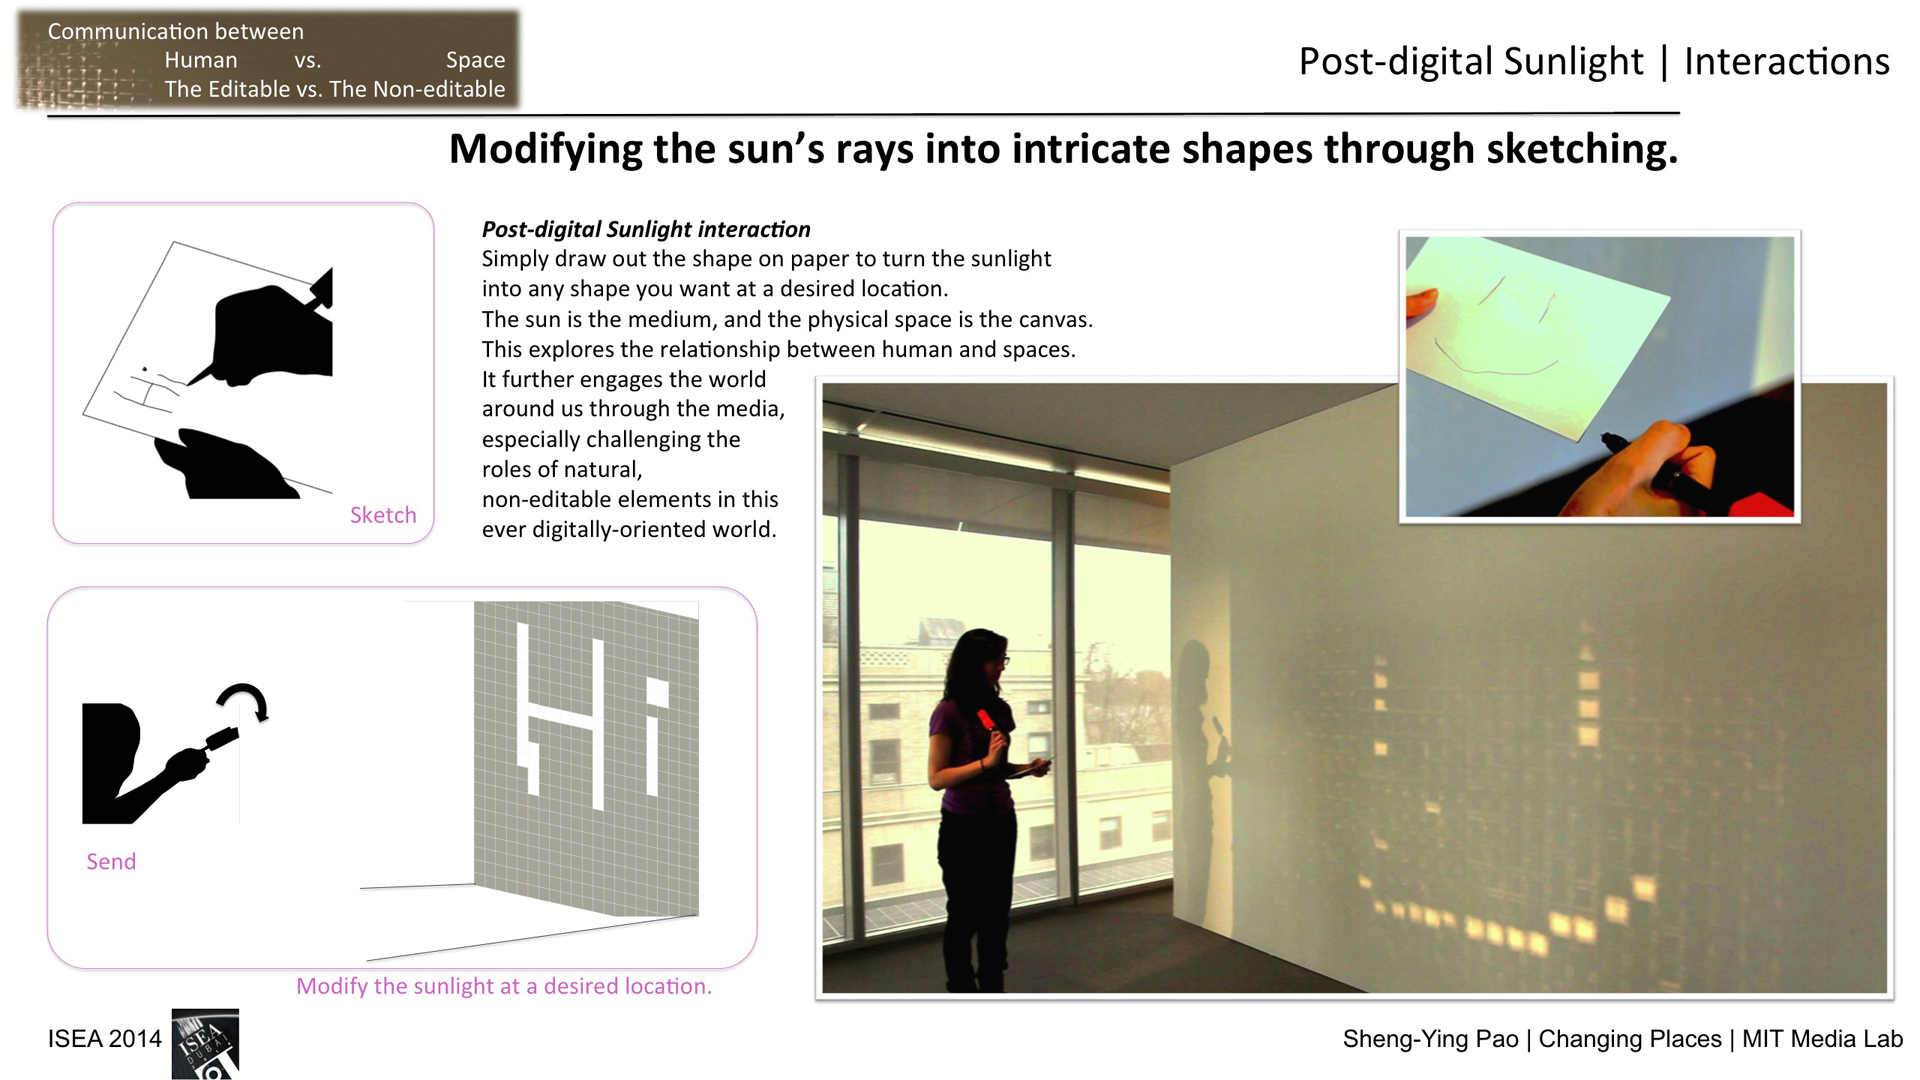 ©, Sheng-Ying Pao, PostDigital Sunlight: Participatory Space Crossing Virtual and Physical, Artificial and Natural